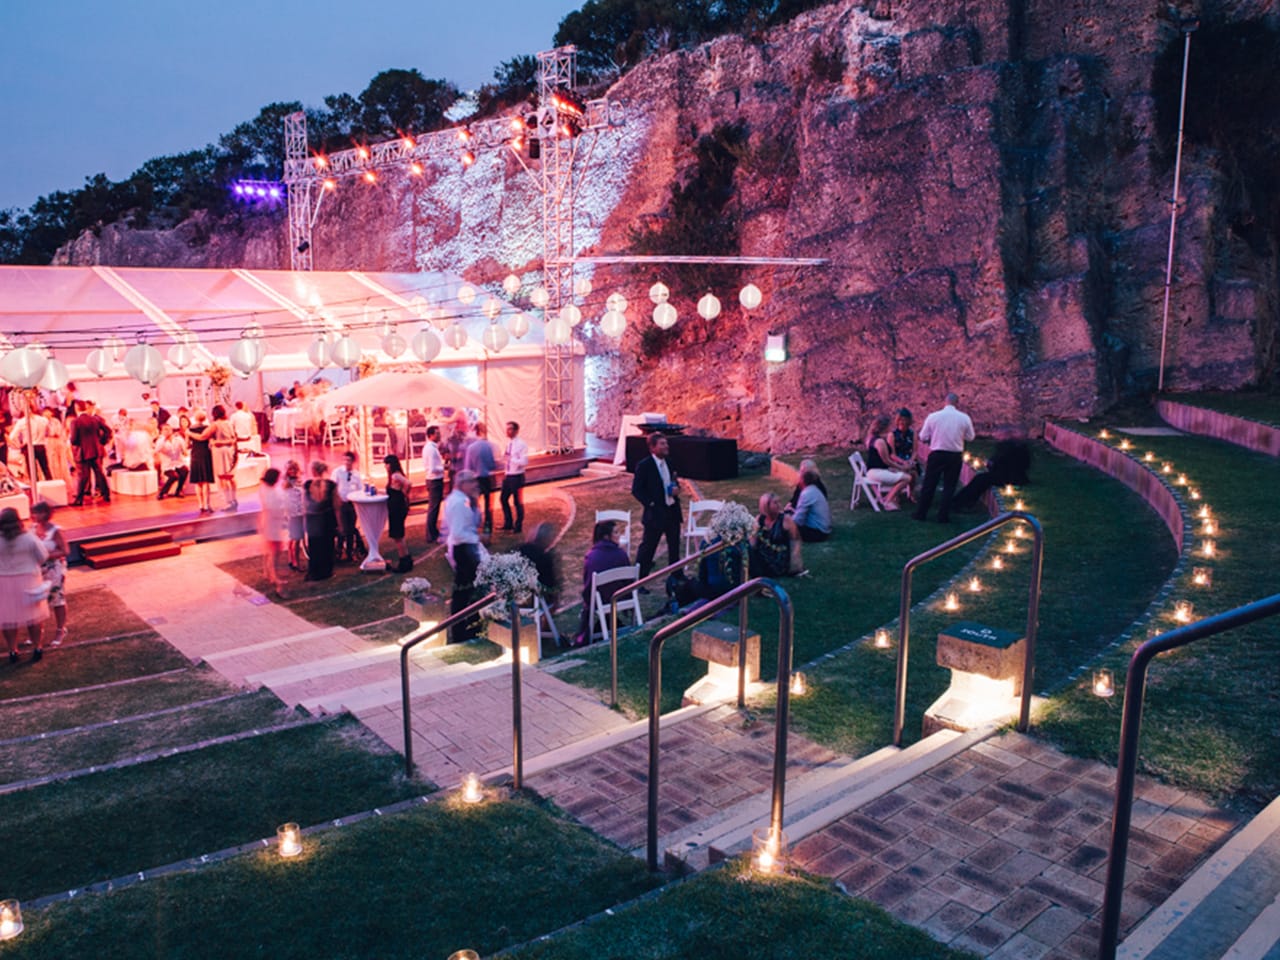 People Gathering Outside The Function Room In The Evening With Cocktail Tables And Round Hanging Lights